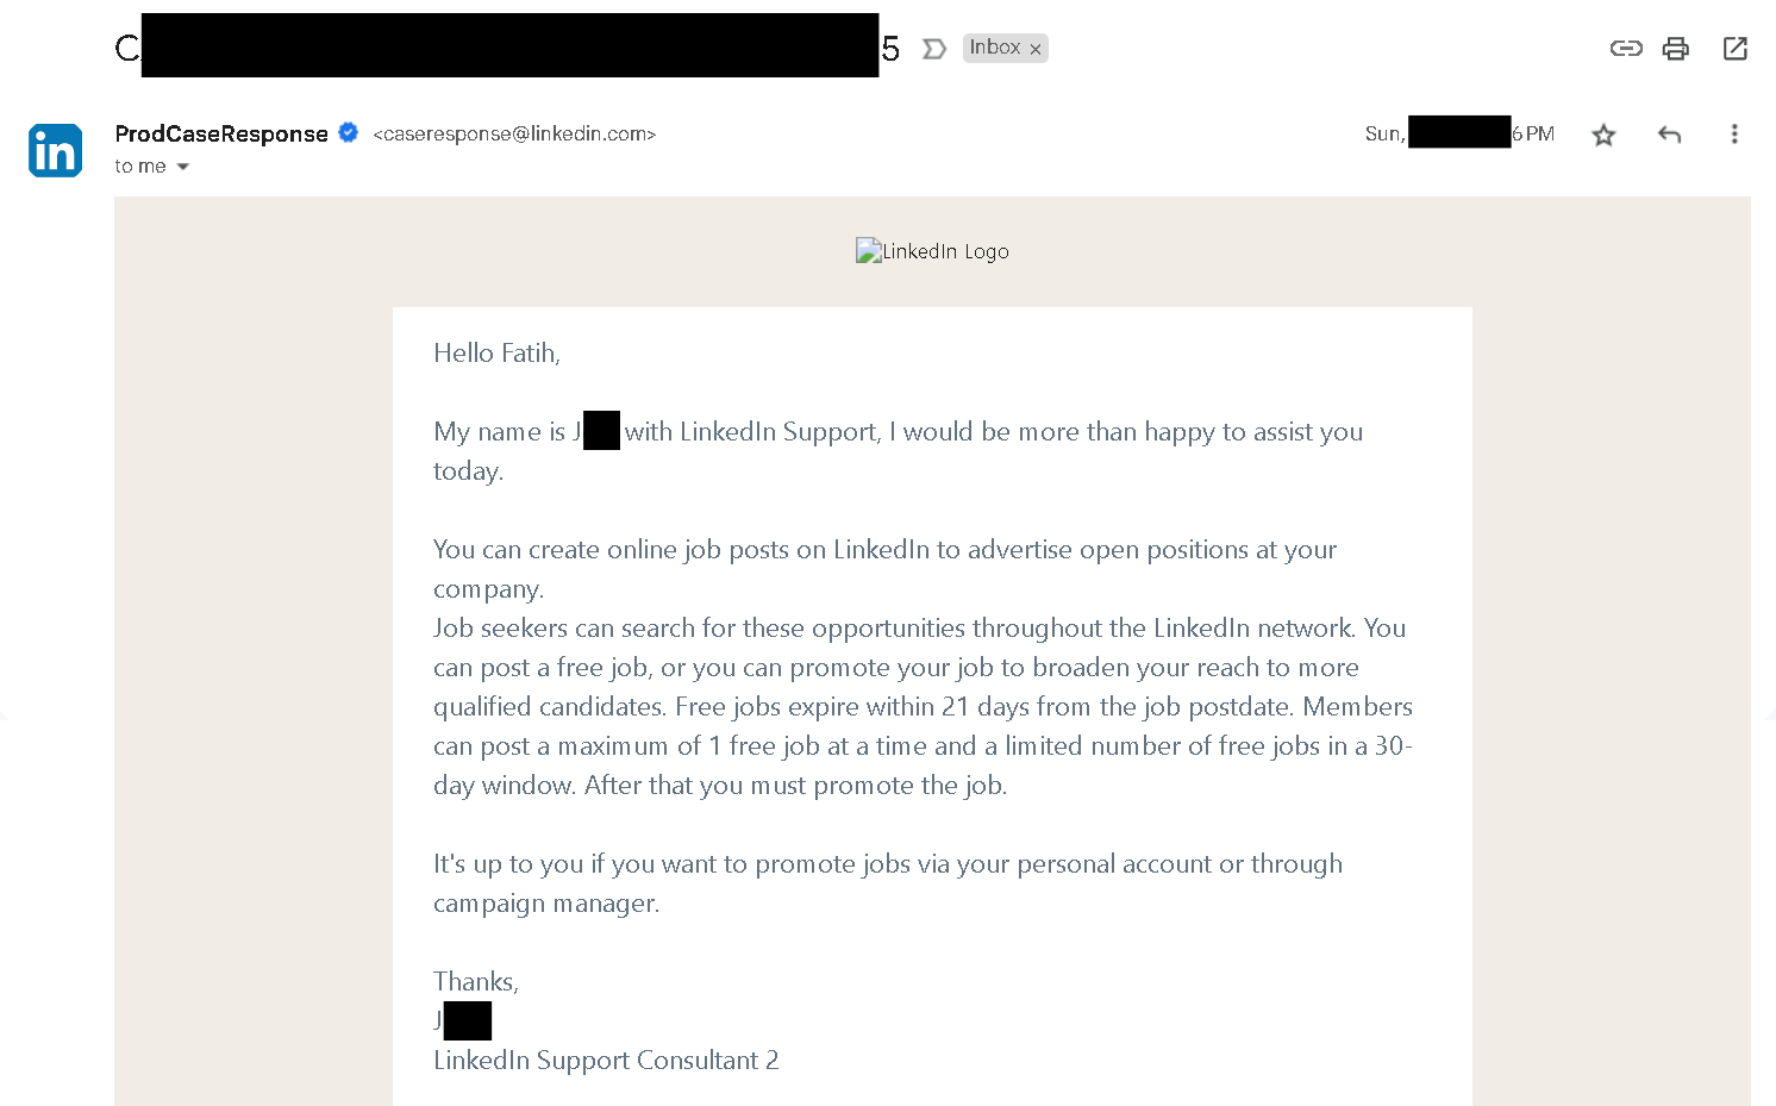 LinkedIn support just told you about Linkedin free job post limit and LinkedIn promoted jobs.